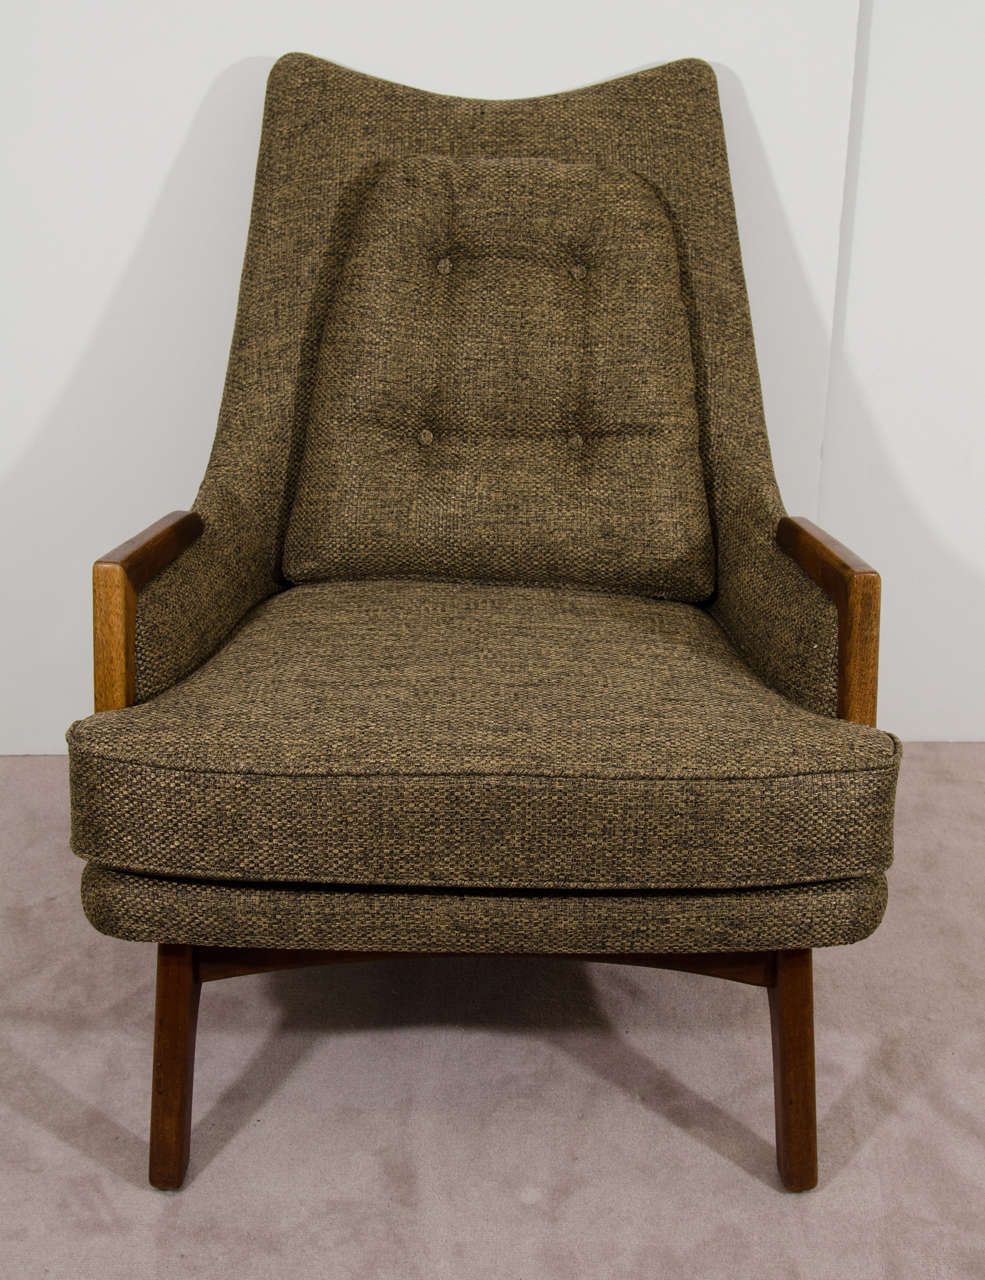  Fantastic Design Midcentury Adrian Pearsall Lounge Chair with Ottoman In Excellent Condition For Sale In Mount Penn, PA